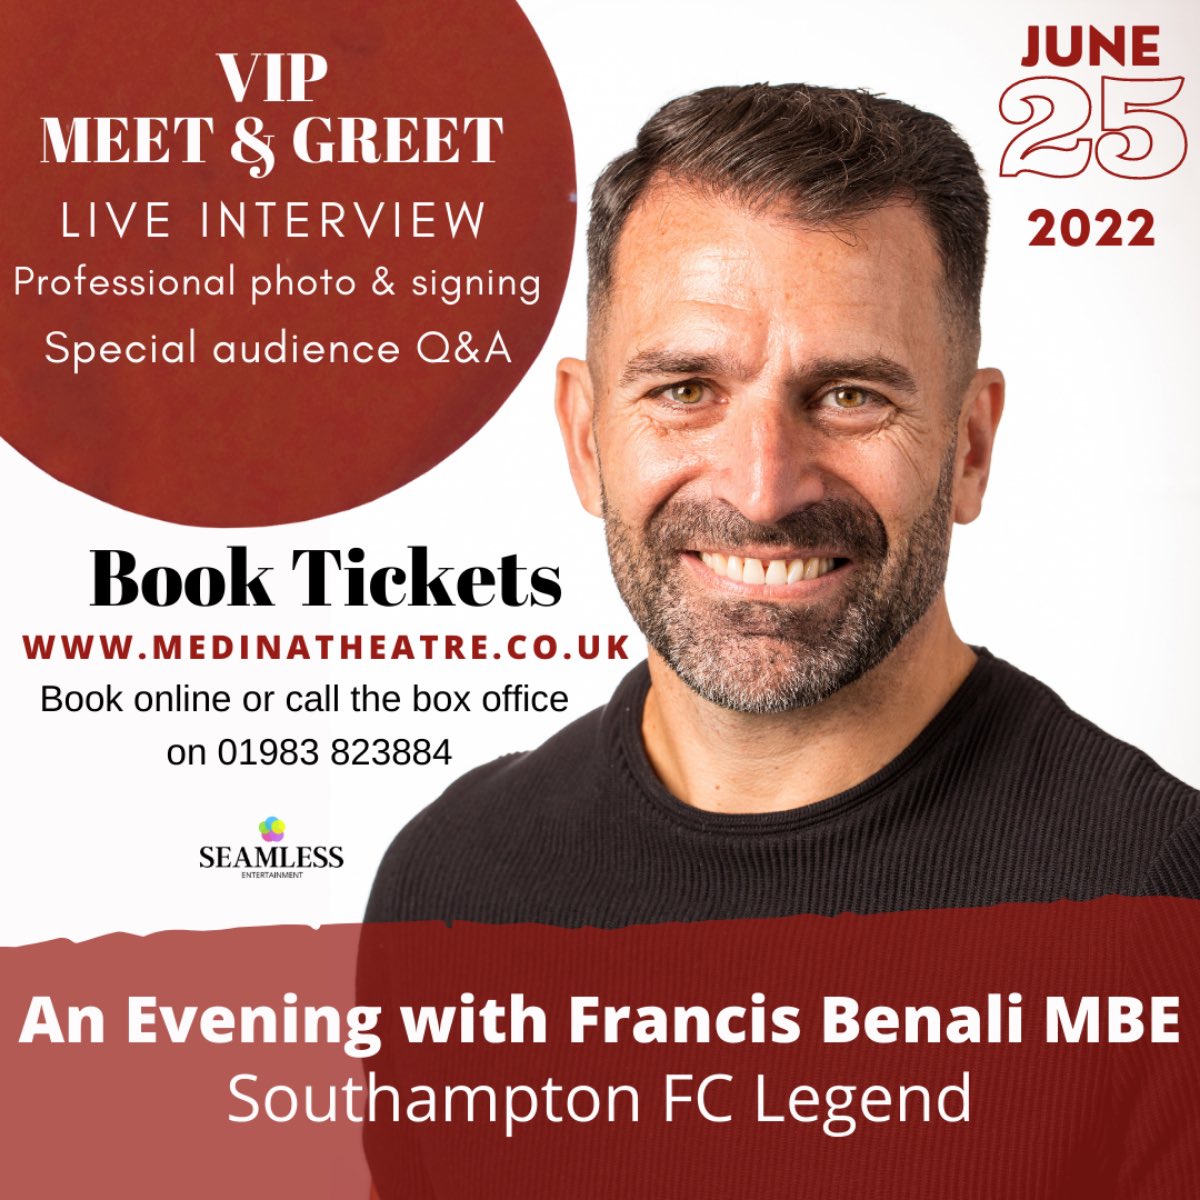 Really excited to announce I will be coming to Medina Theatre, Isle of Wight, on June 25th 2022. Join me for a VIP meet & greet, live and unscripted interview and a special audience Q&A. Tickets are available now via tinyurl.com/Benali-Tickets Can’t wait to see you there! 🗣🎤